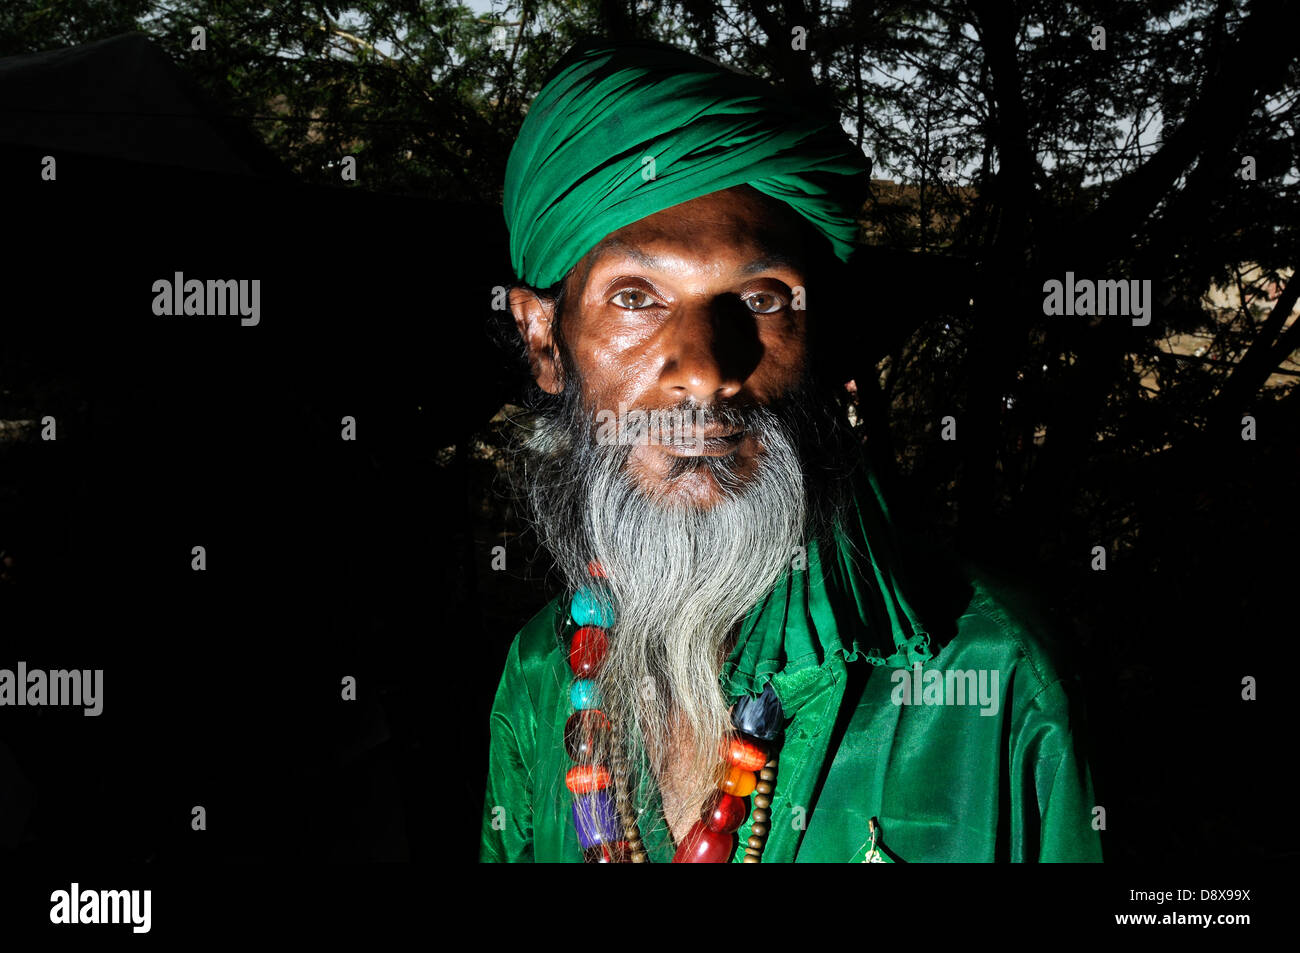 Sufi fakirs (mystics and holy men) in India Stock Photo